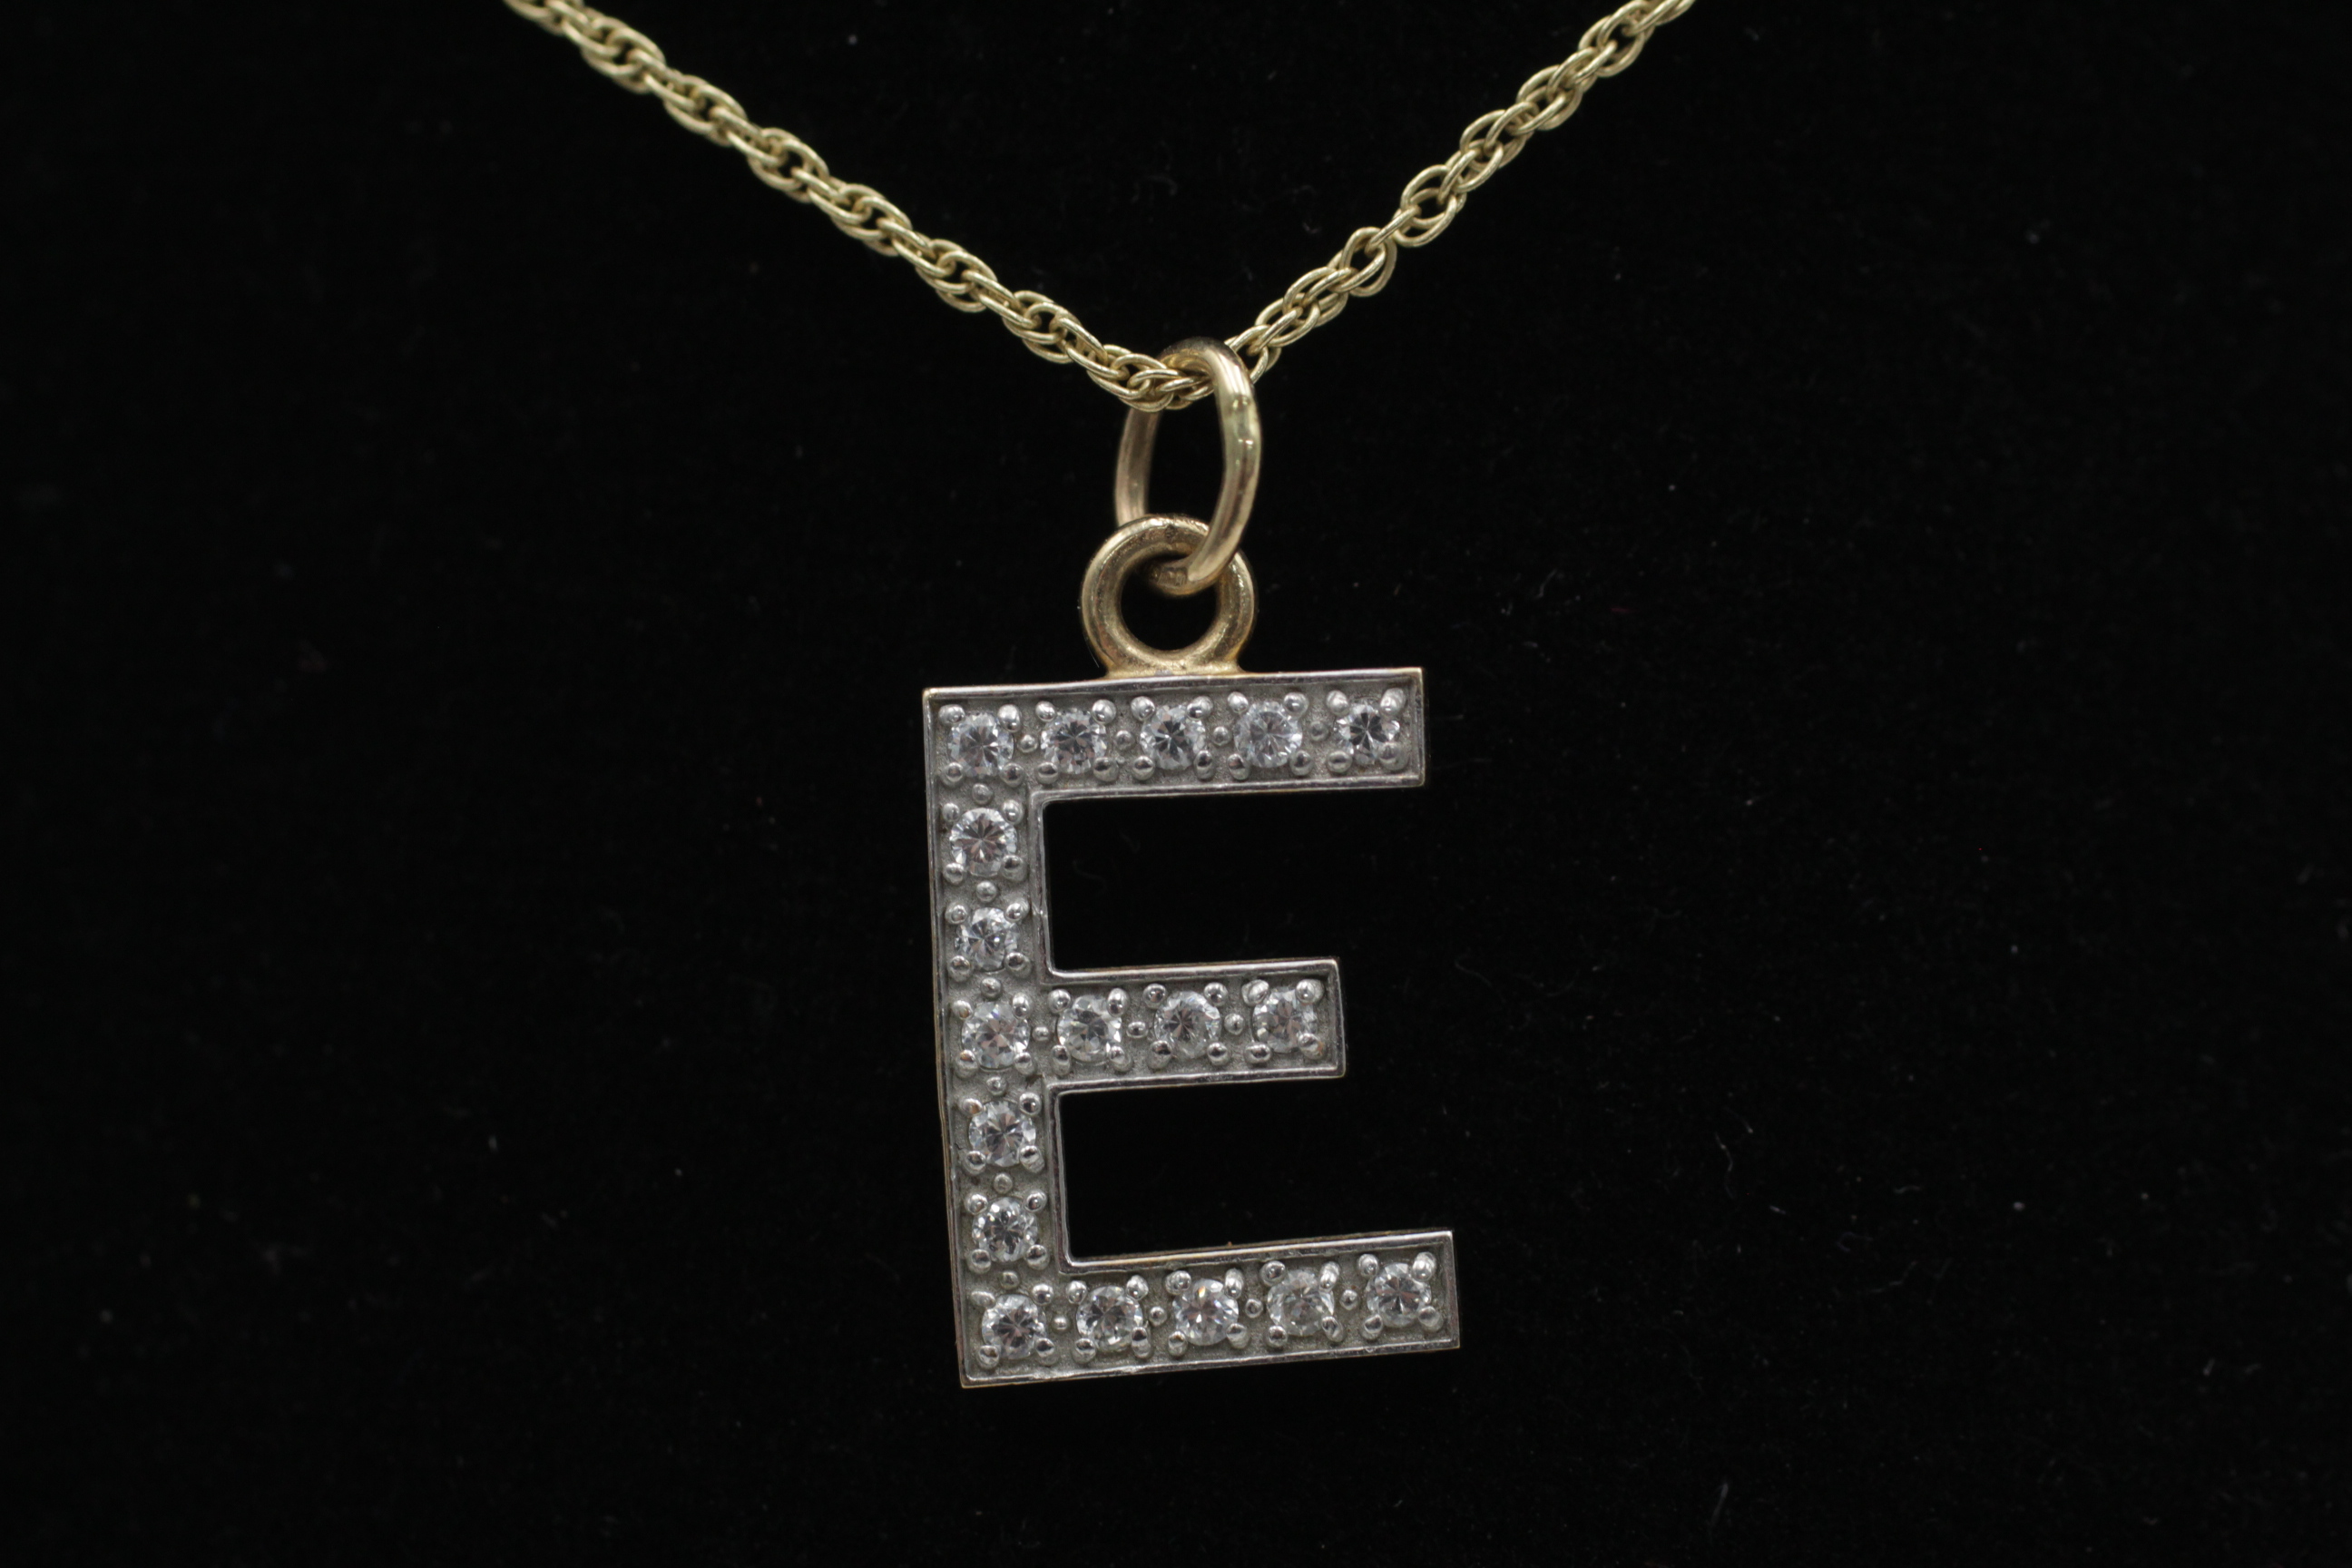 9ct gold vintage clear gemstone set "E" initial letter pendant necklace (2.7g) - Image 2 of 6